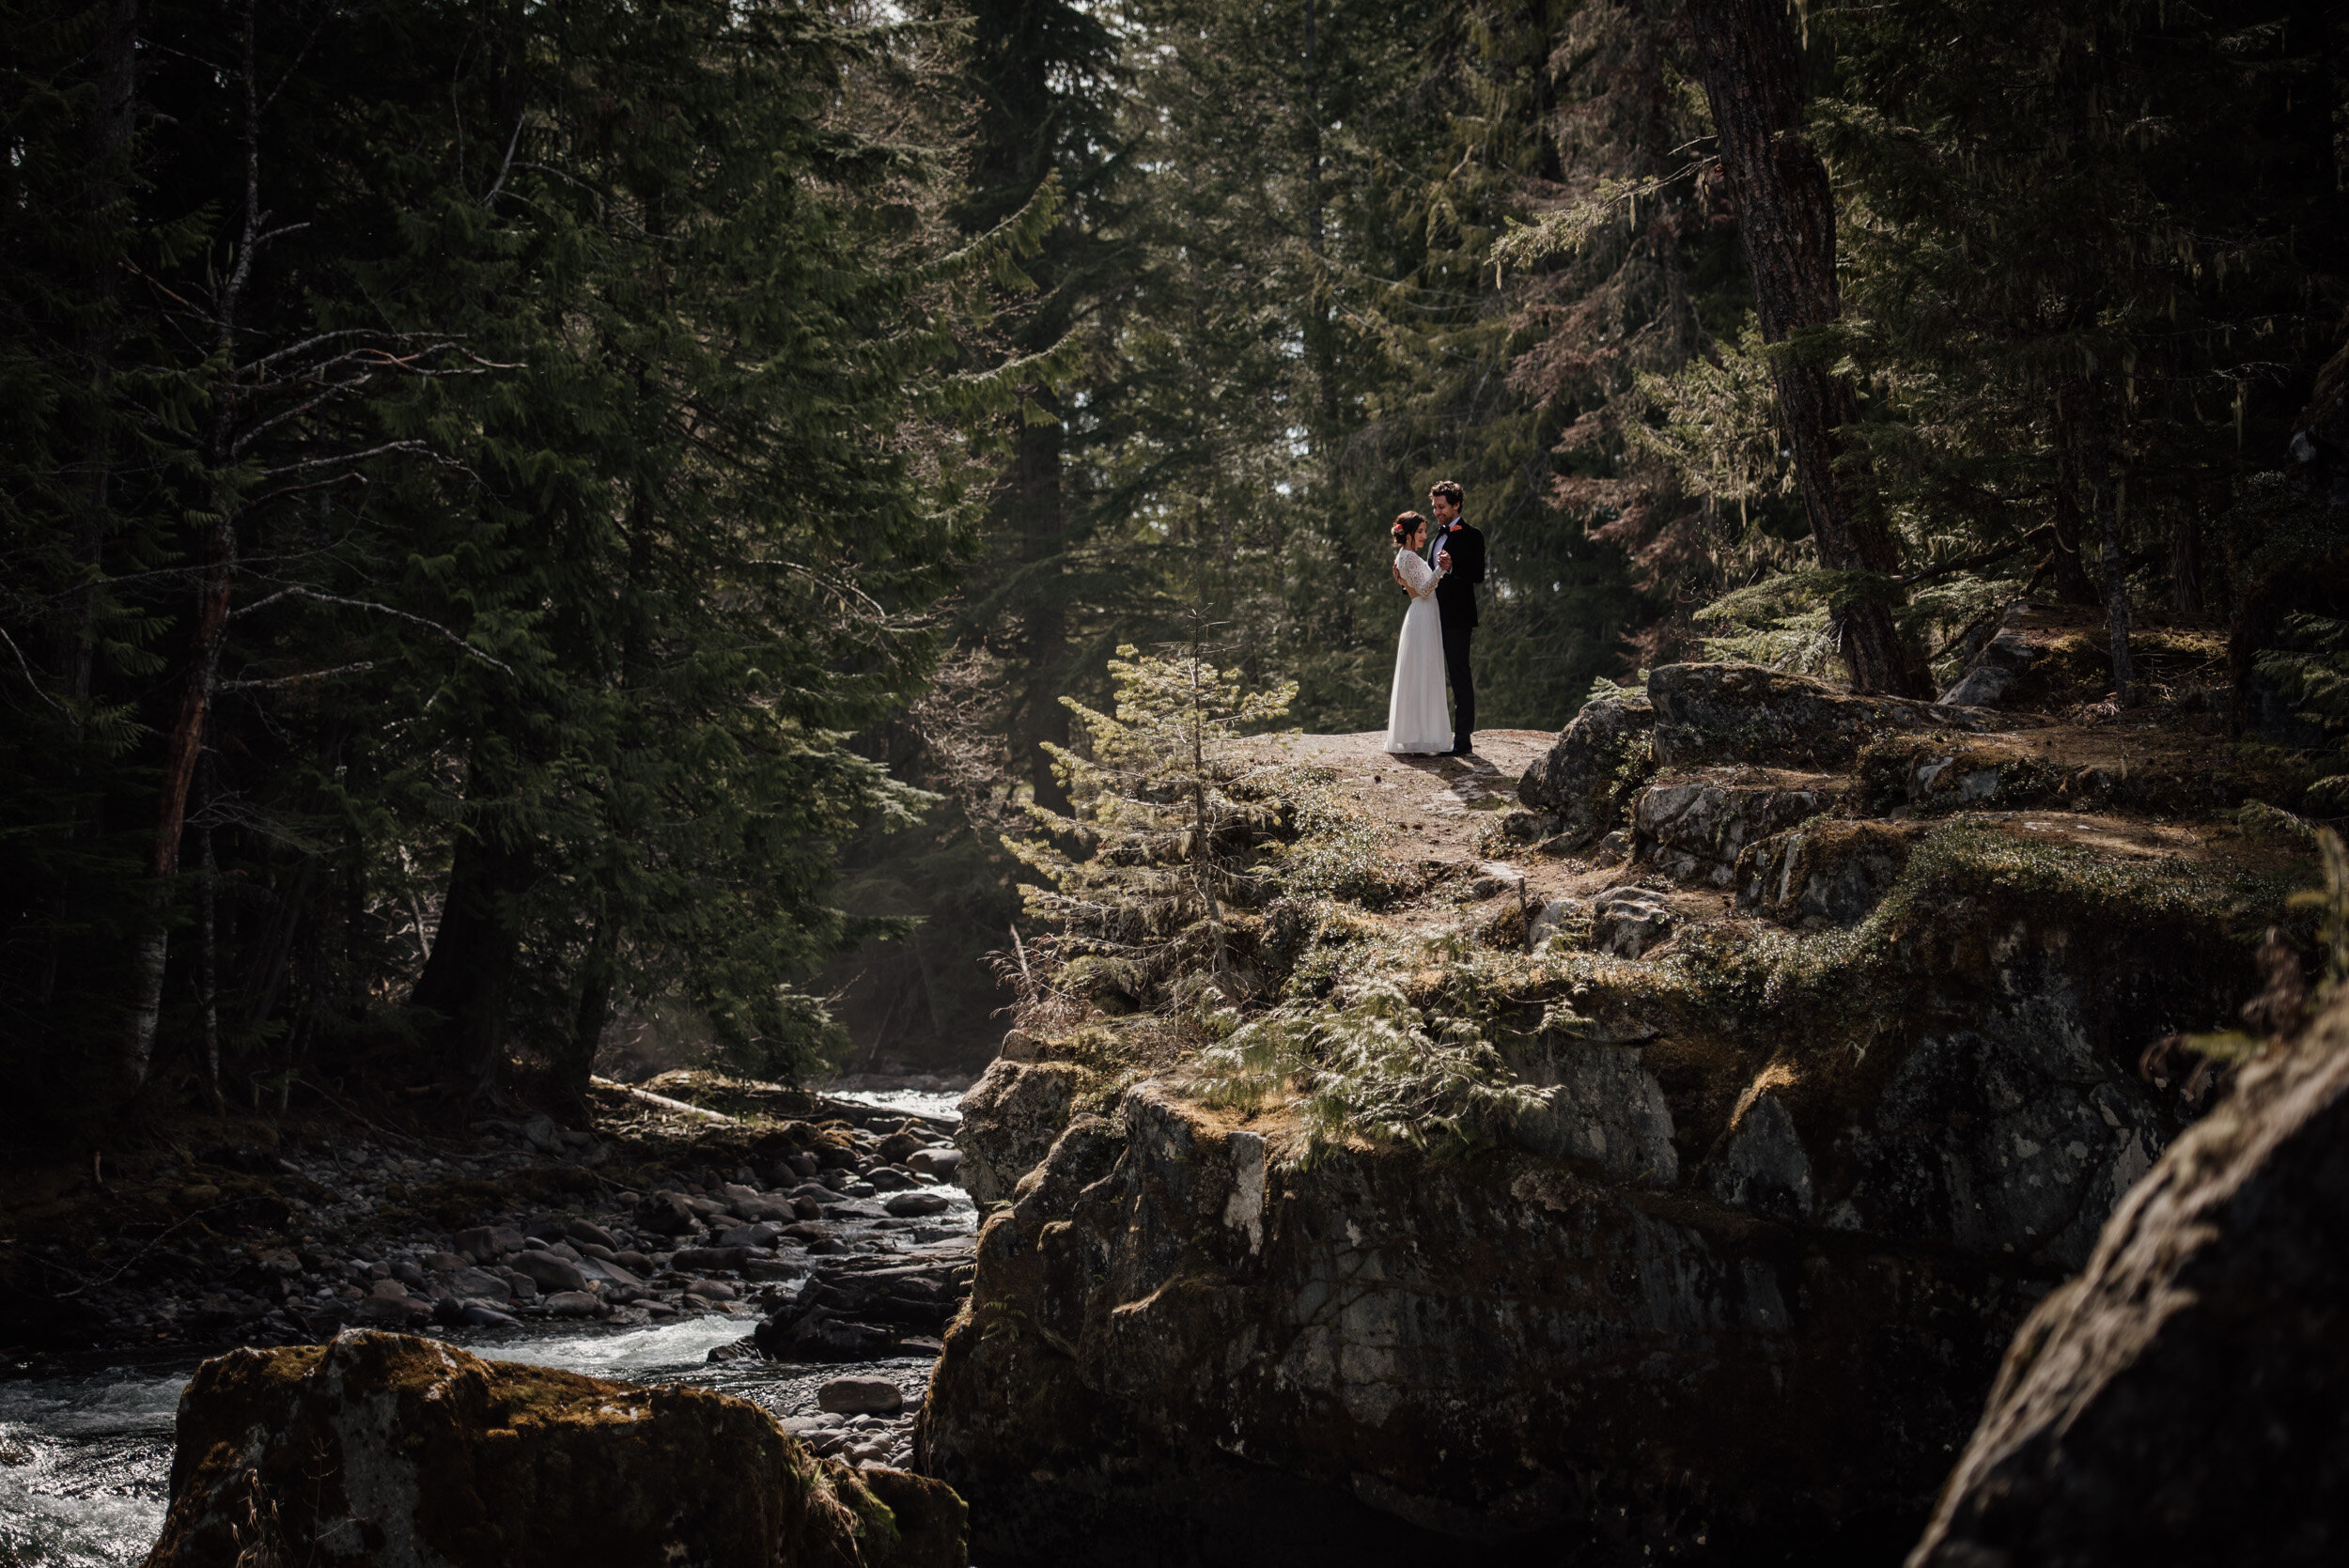 Dramatic portrait of bride and groom in the forest by the river in Whistler